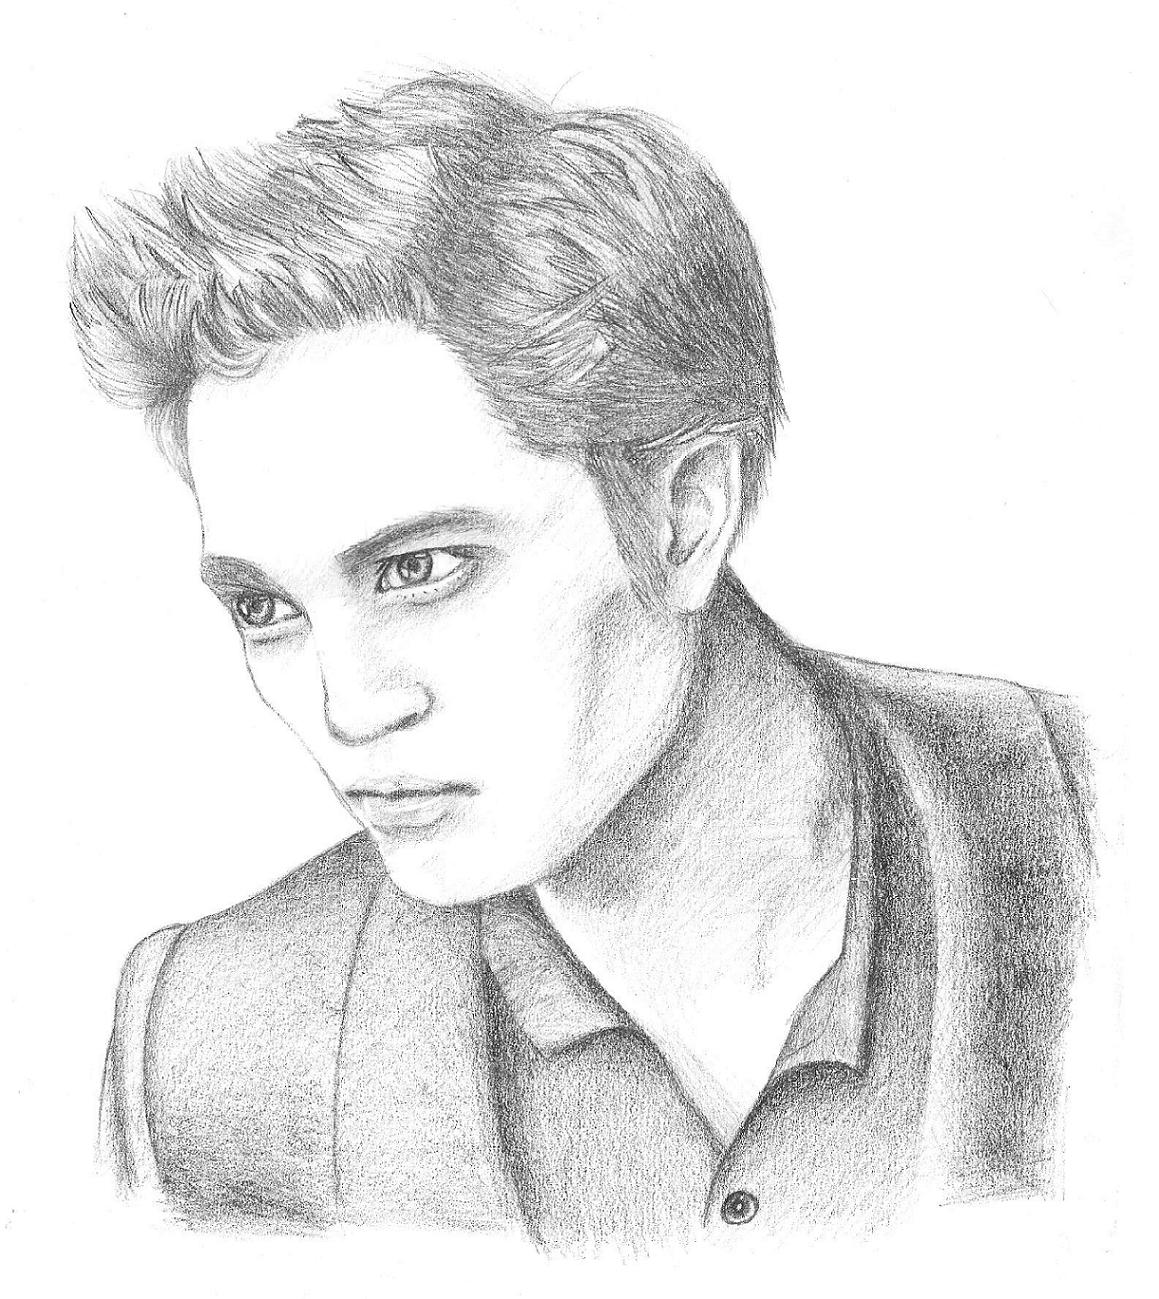 Edward Cullen.. Not Elvis by Troutfeather